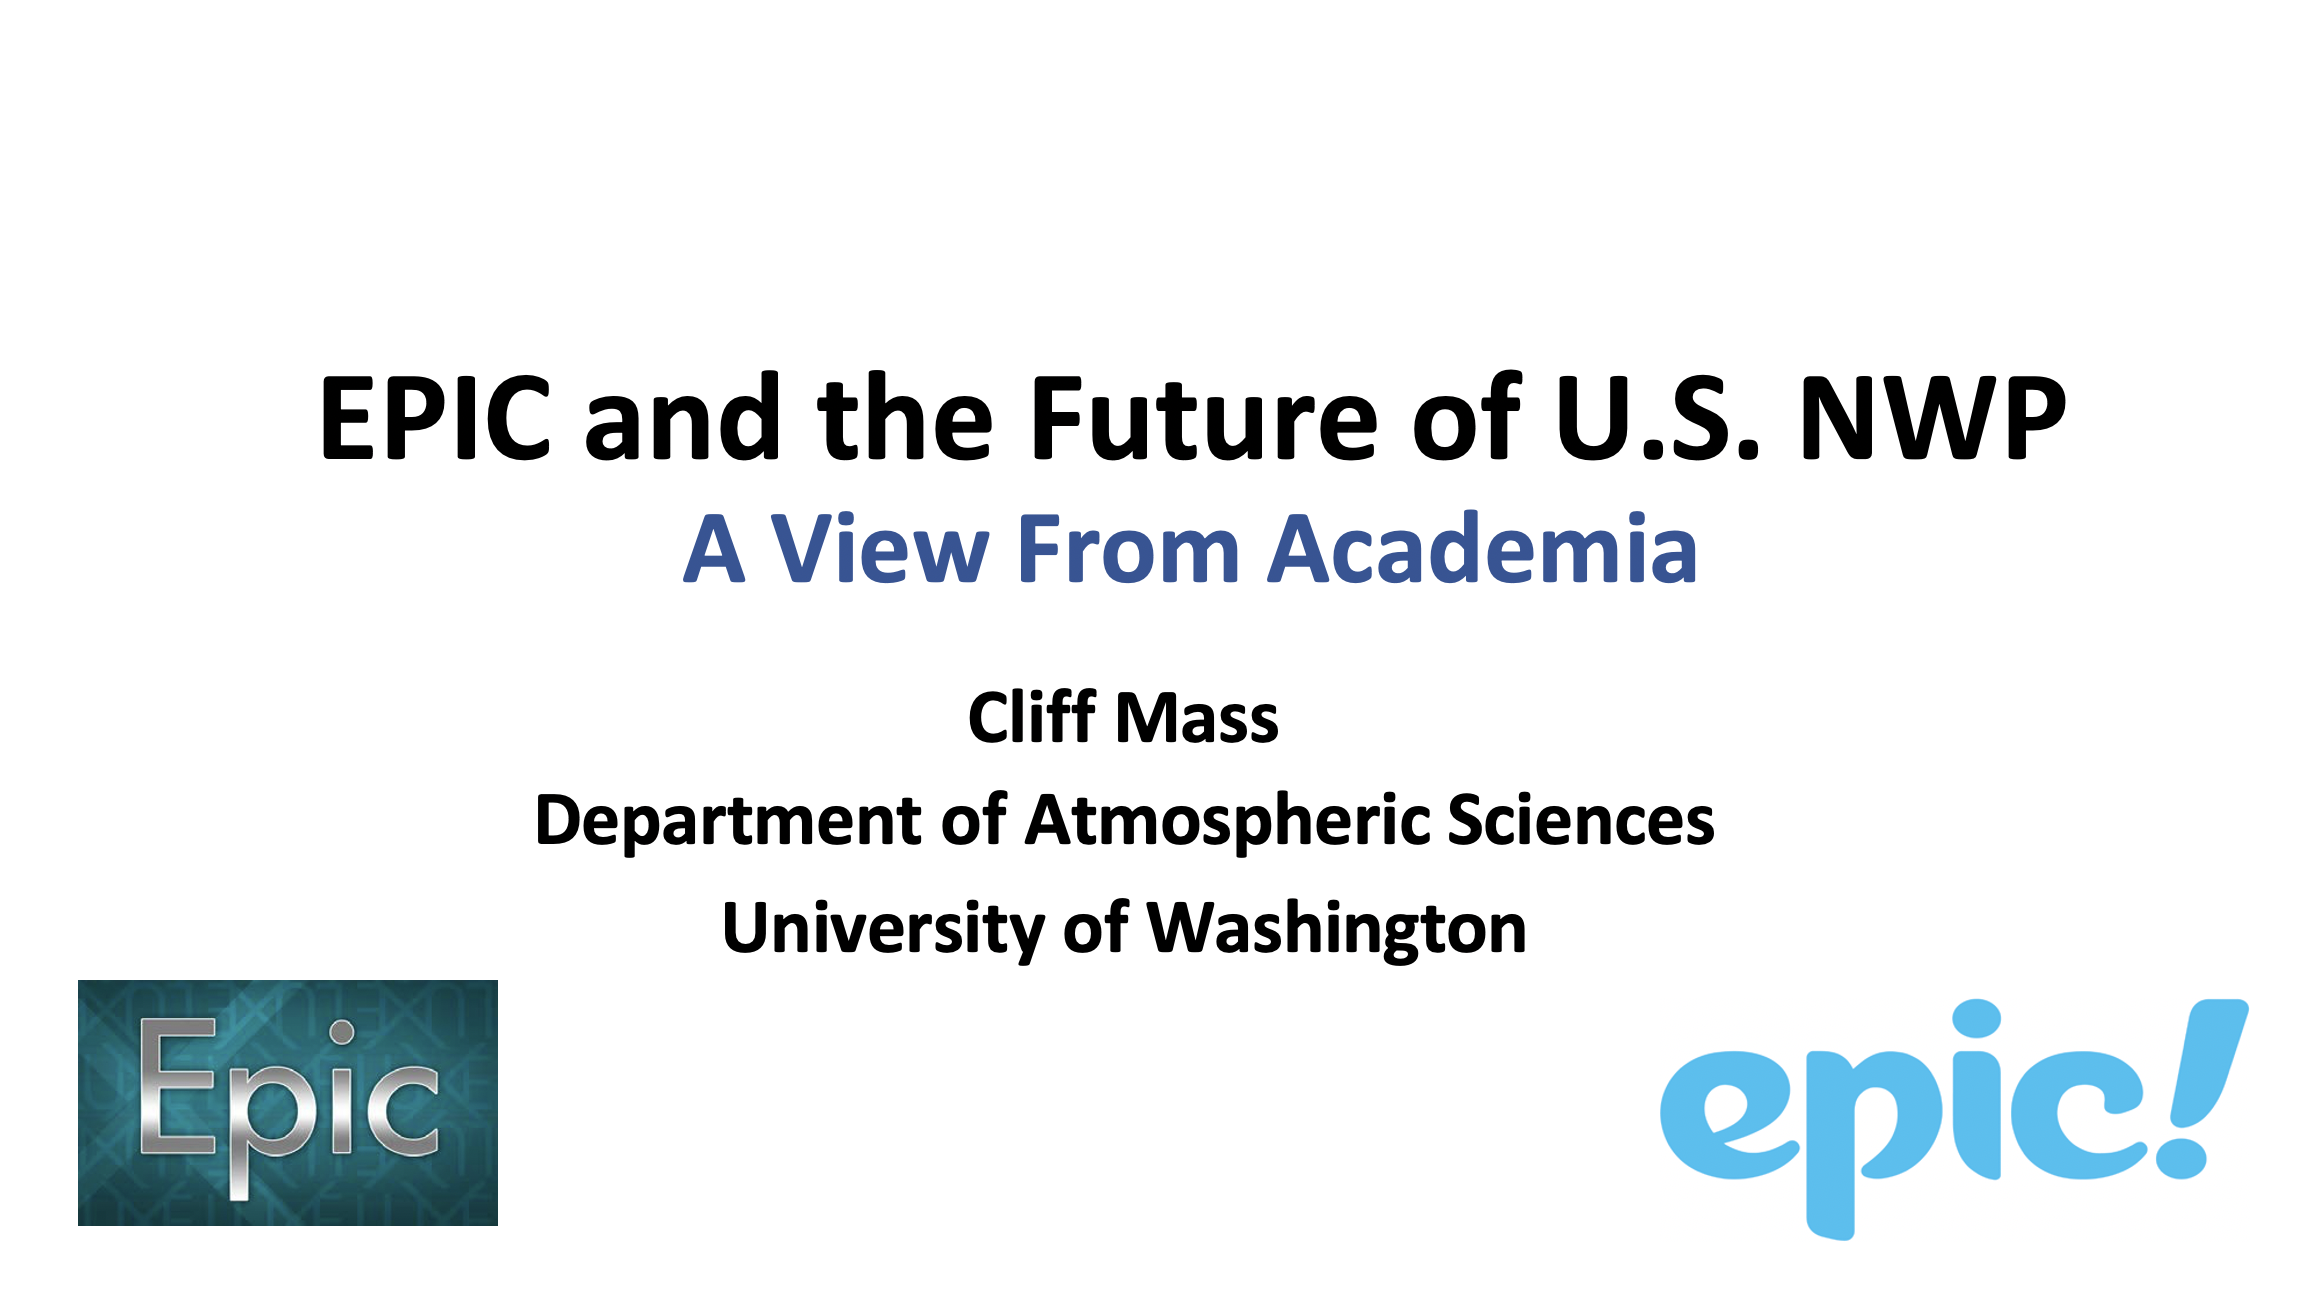 EPIC and the Future of U.S. NWP: A View From Academia